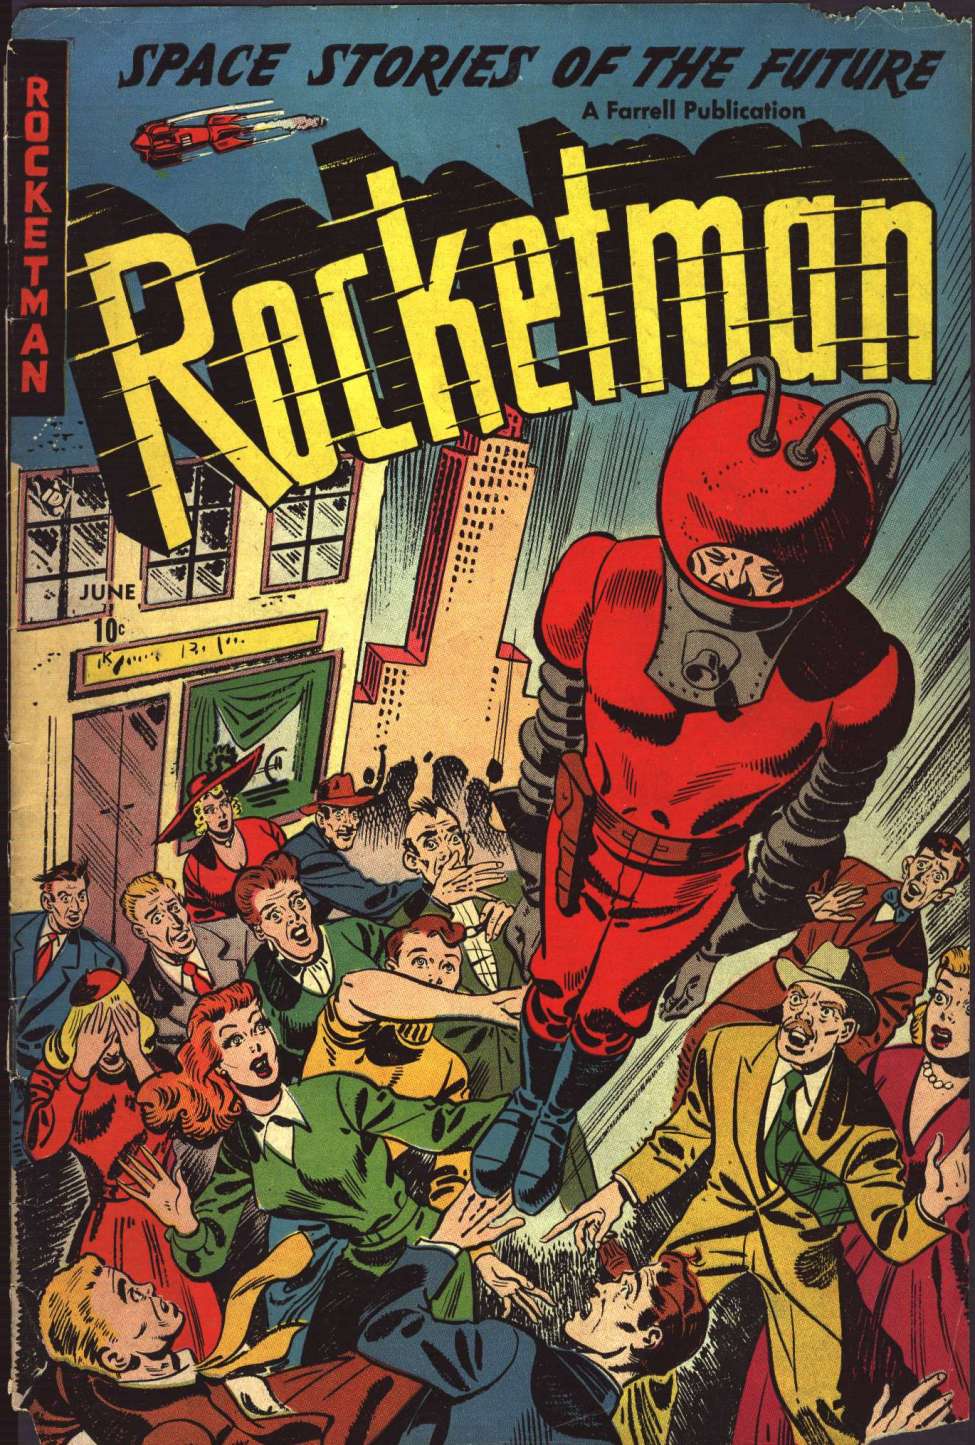 Book Cover For Rocketman 1